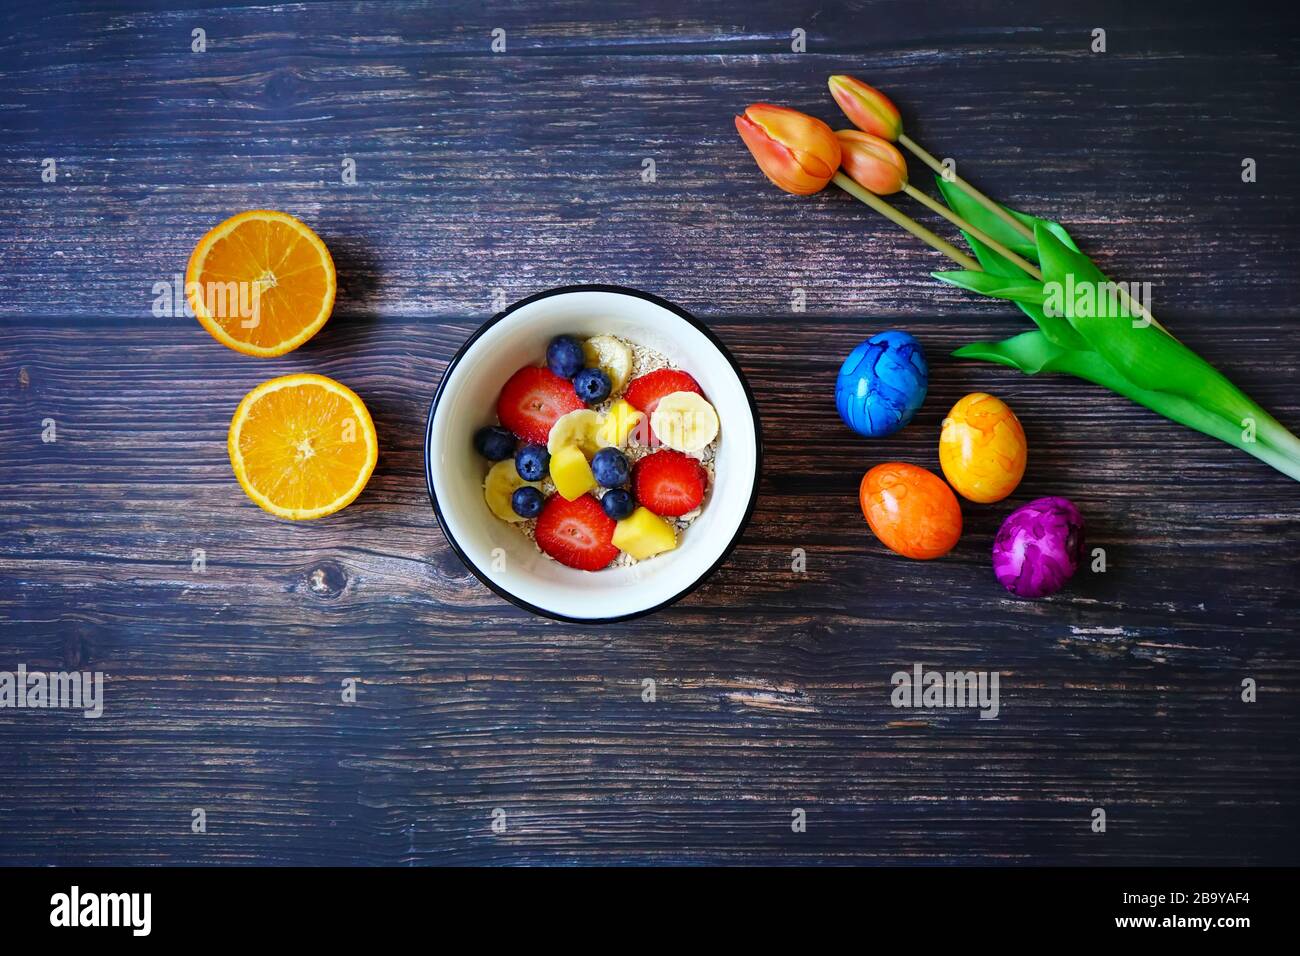 Breakfast cereal bowl with fresh fruits (strawberry, banana, blueberry, mango). Half-cut orange, colorful Easter eggs and orange tulips for decoration Stock Photo